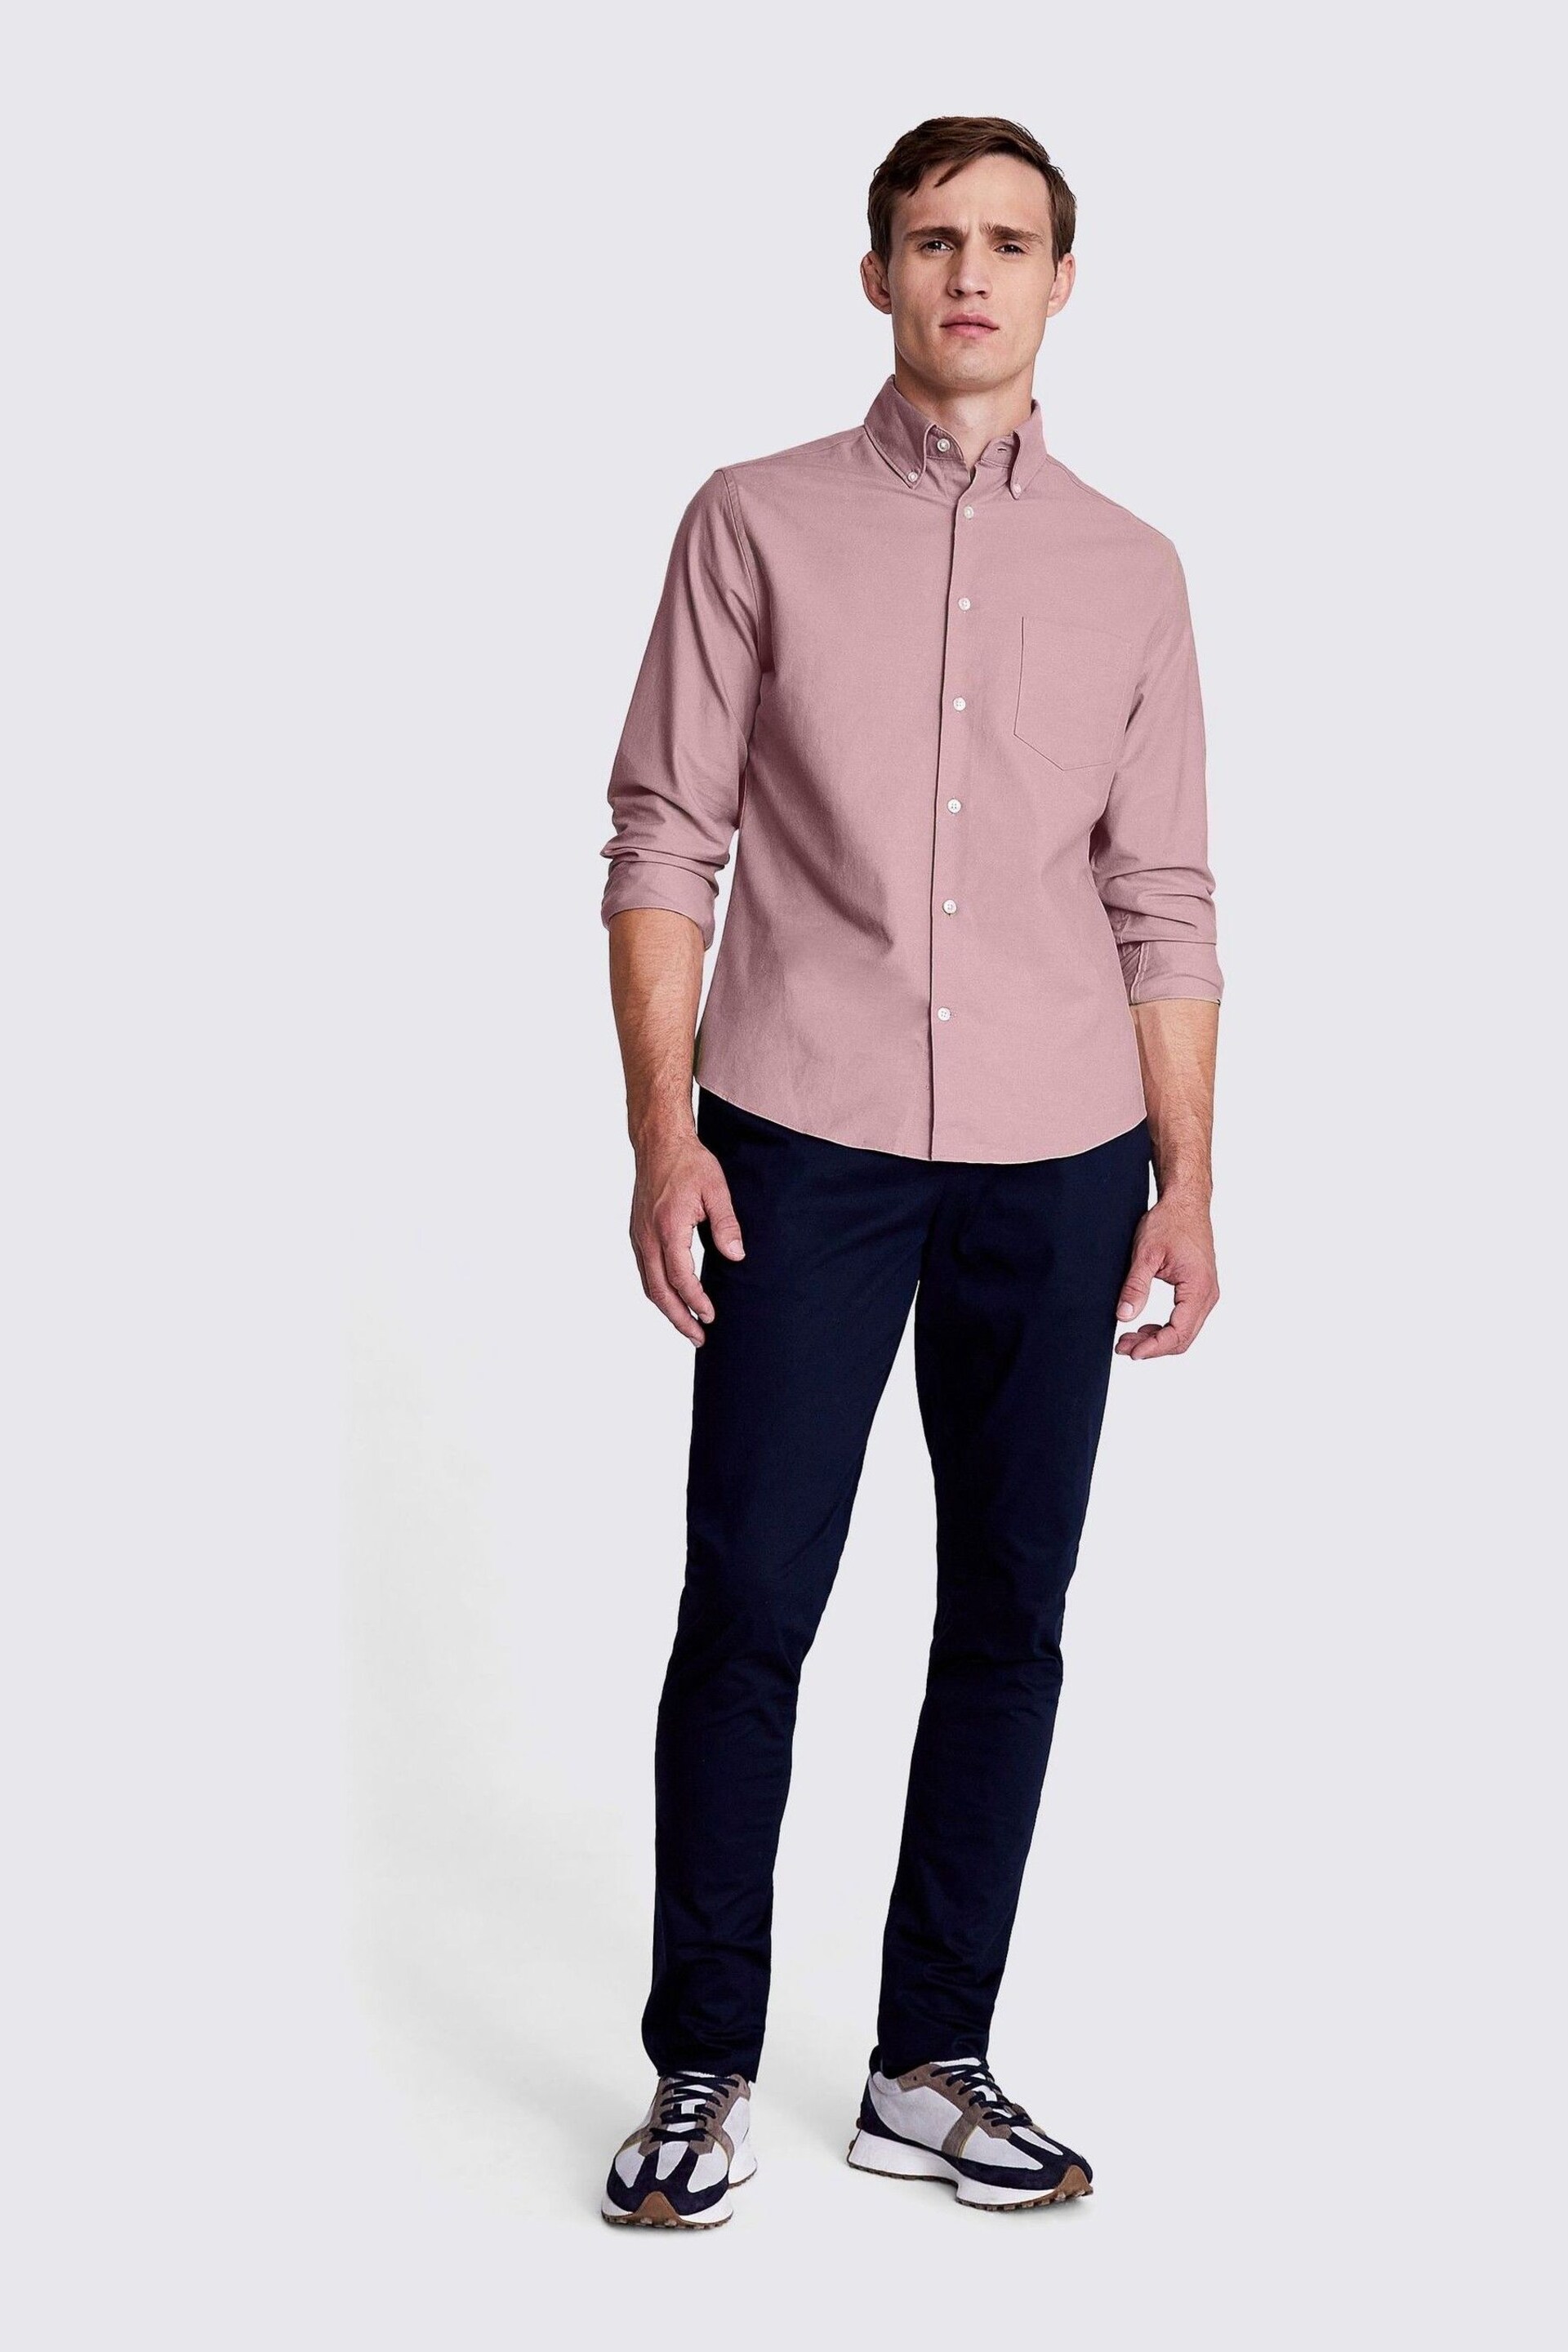 MOSS Pink Washed Oxford Shirt - Image 2 of 6